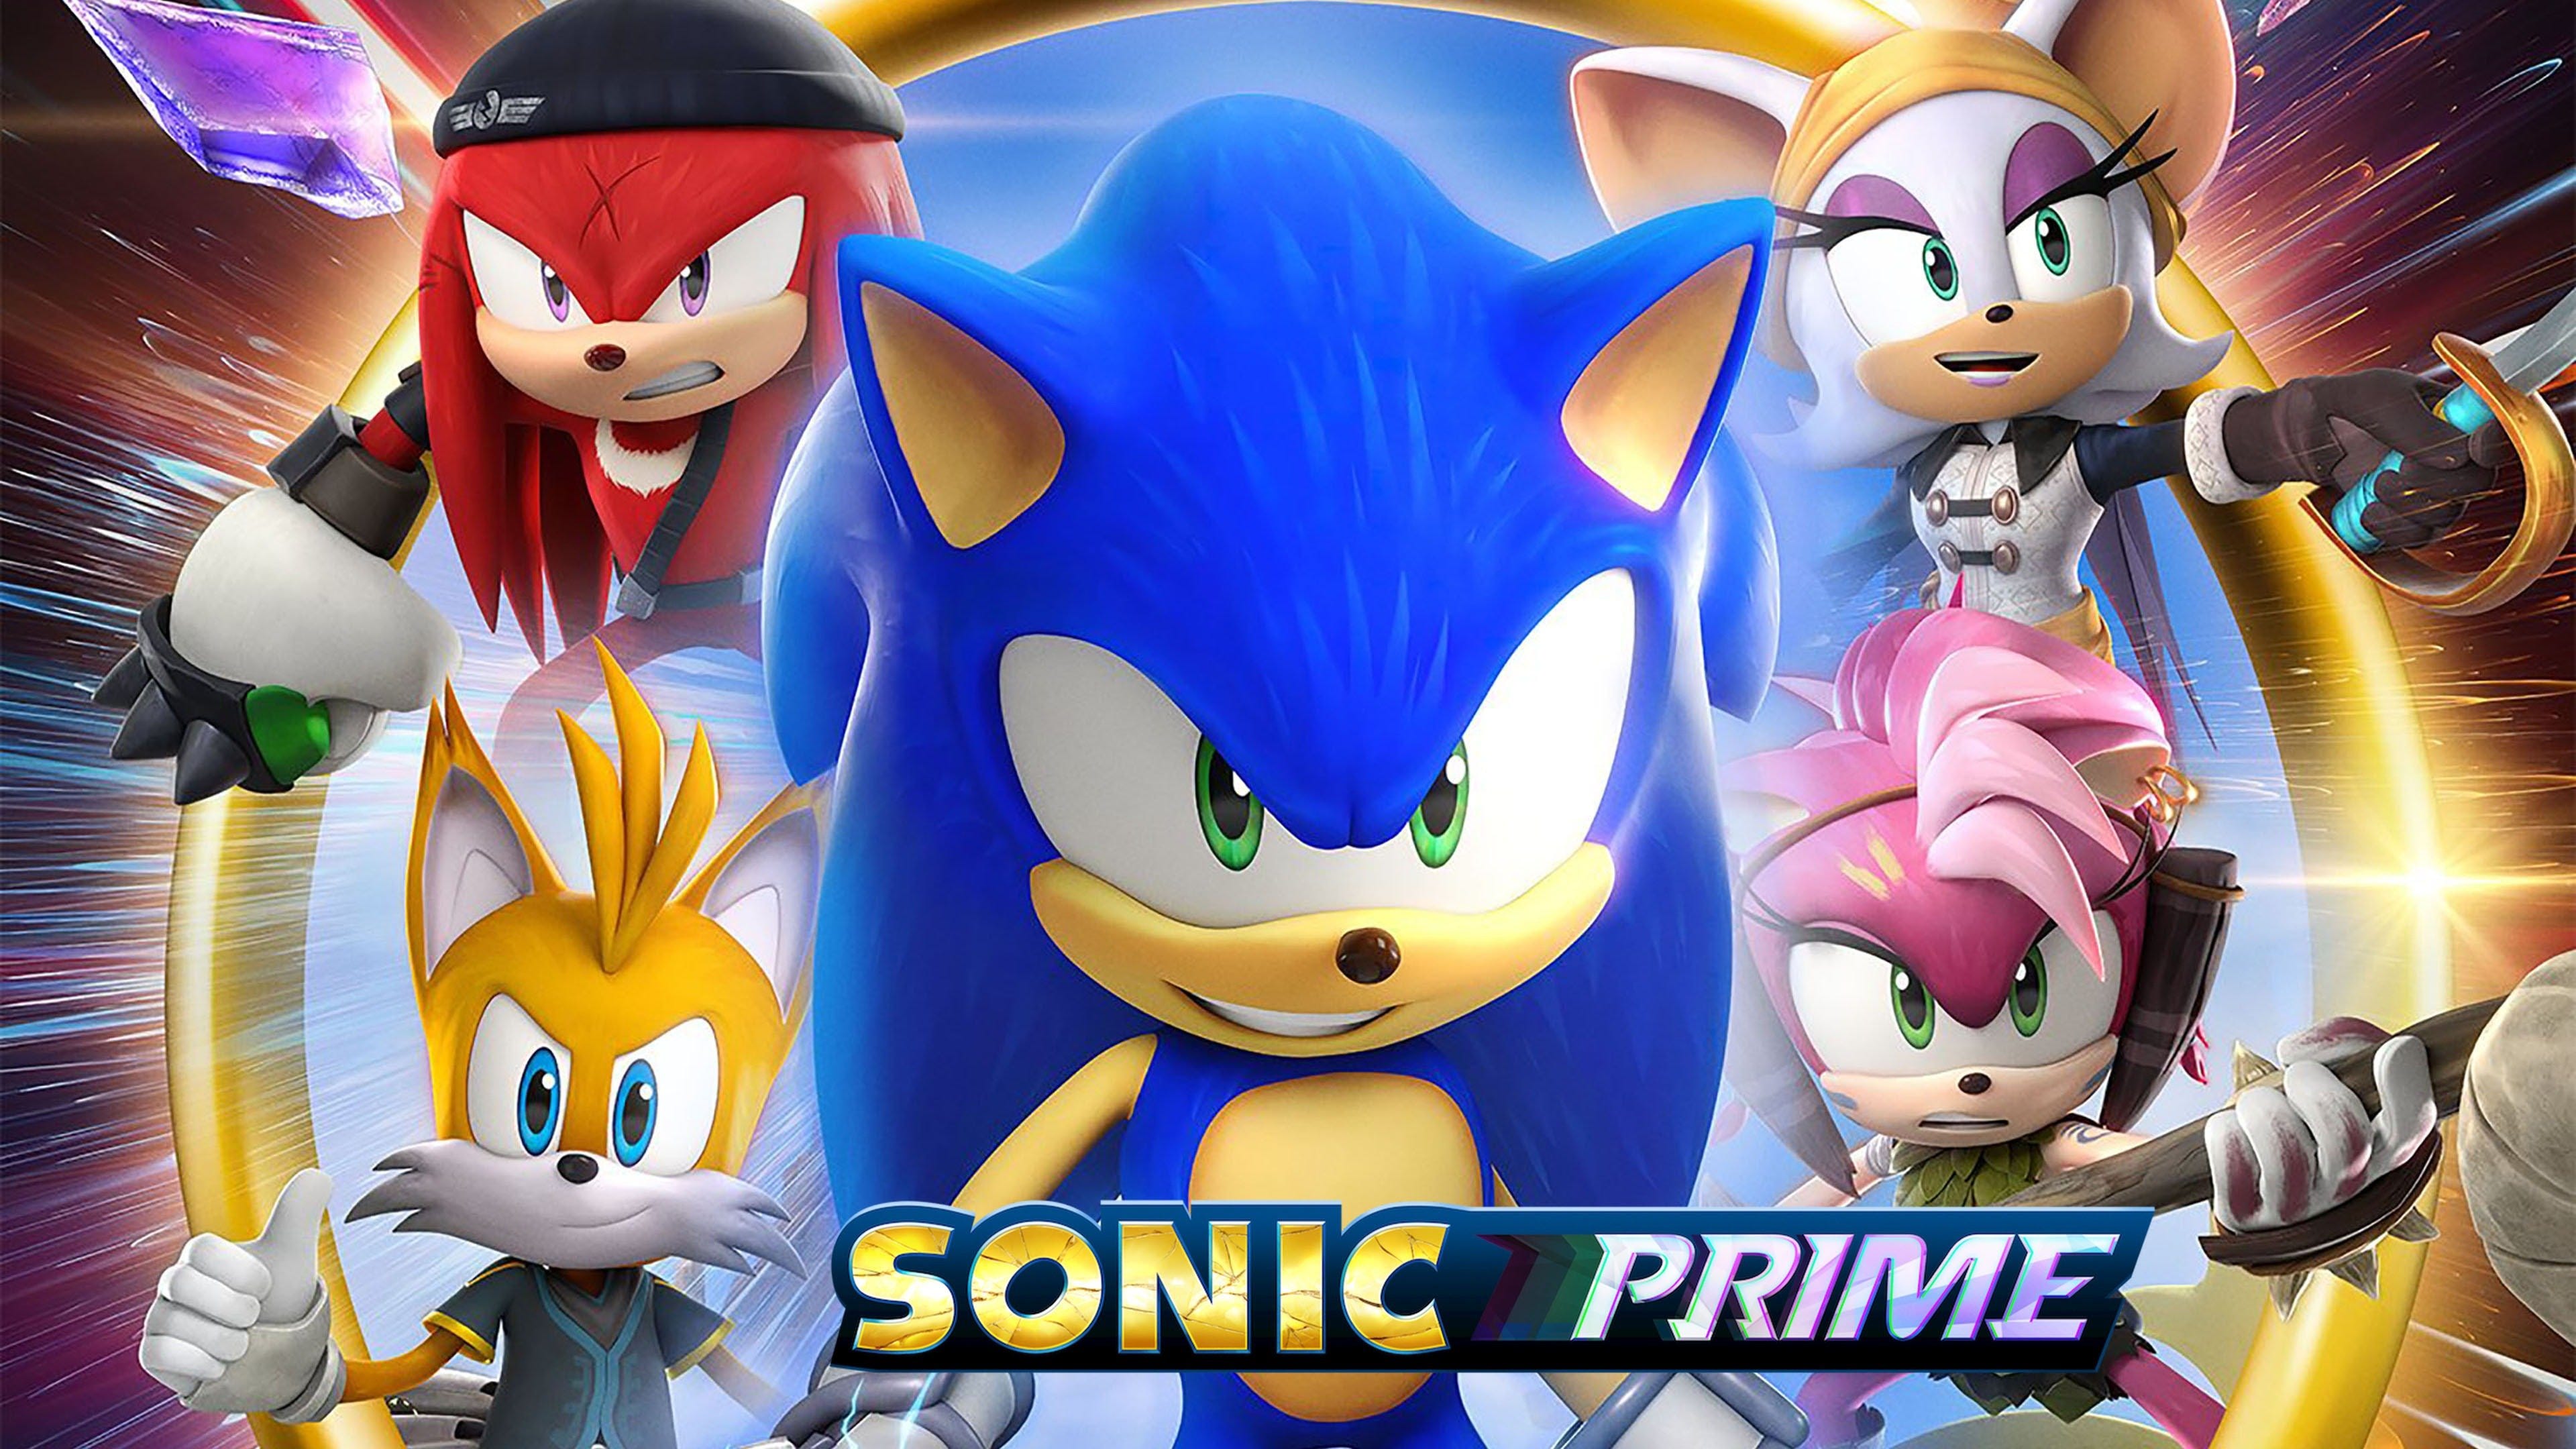 Sonic Prime: Tails, Knuckles, Amy Rose & more in exclusive stills - Dexerto